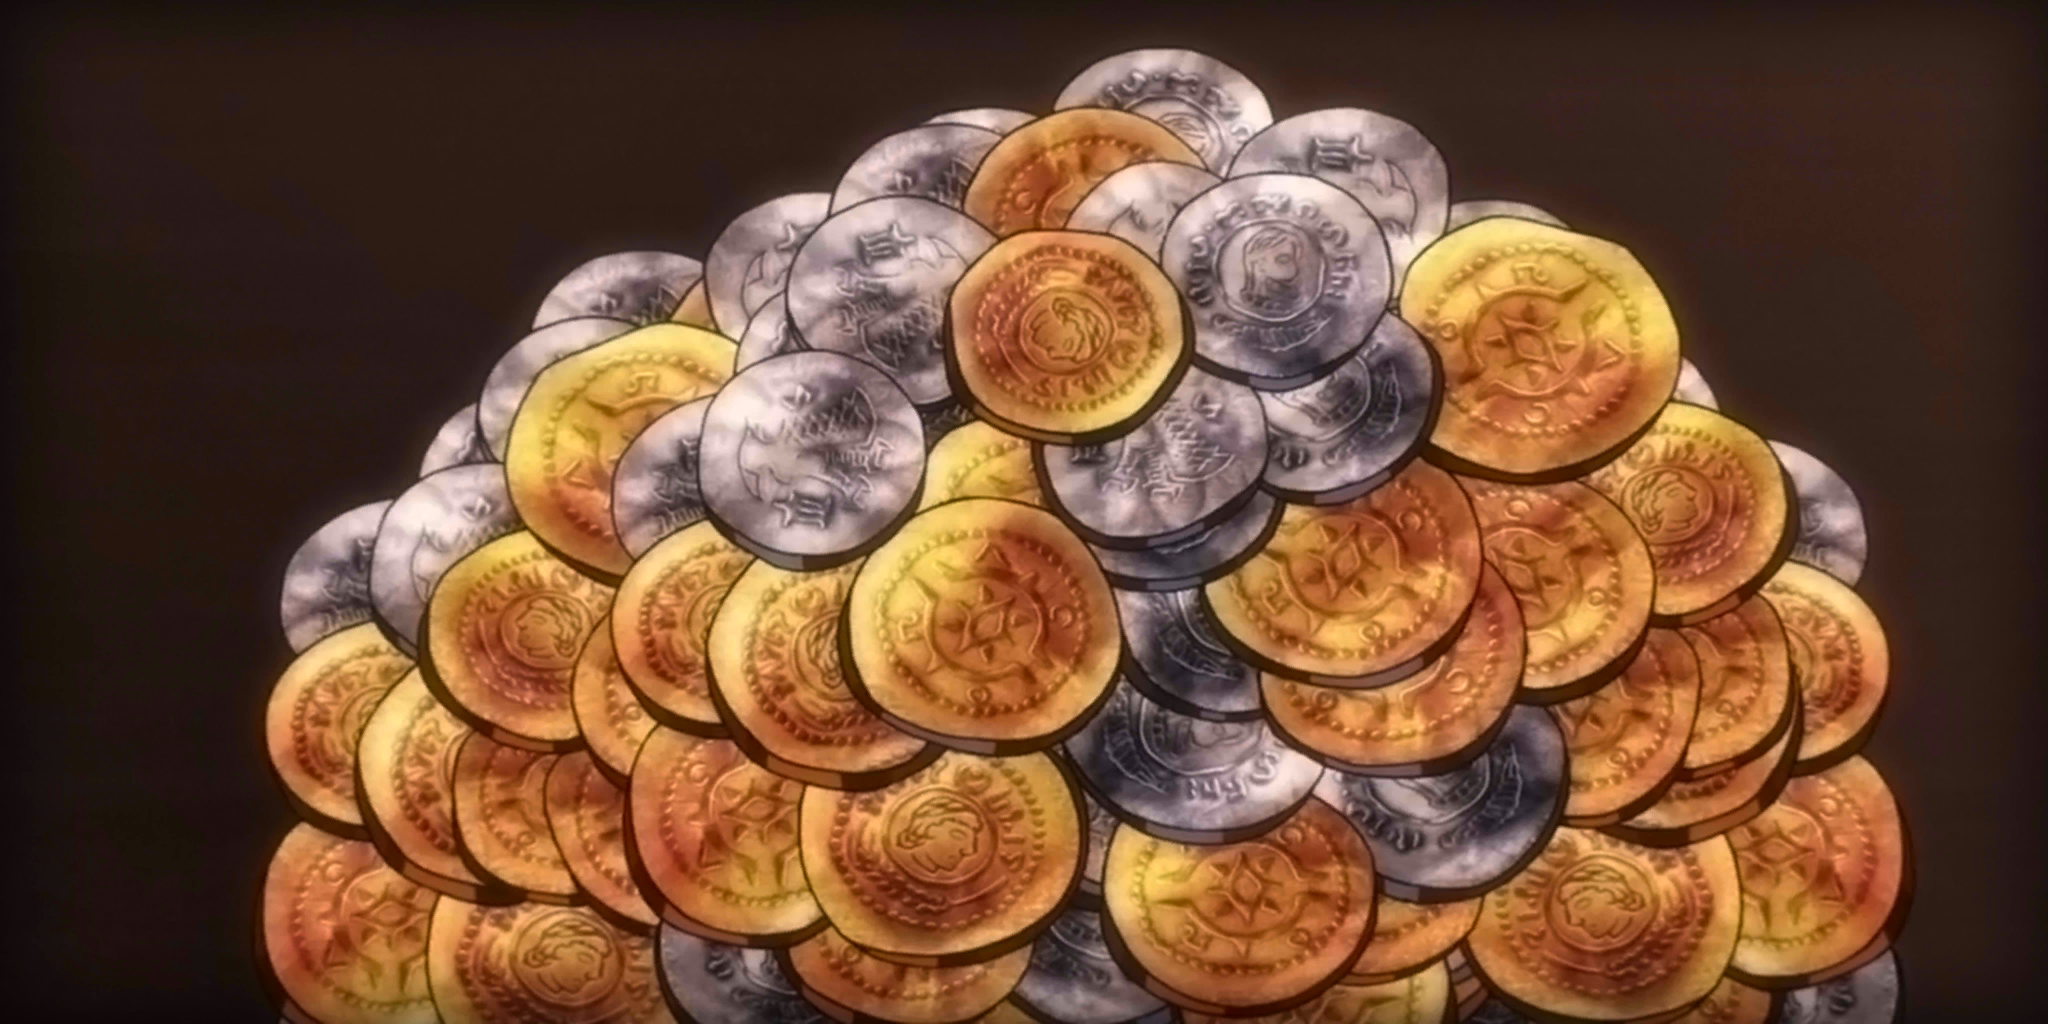 Large Bag of Coins